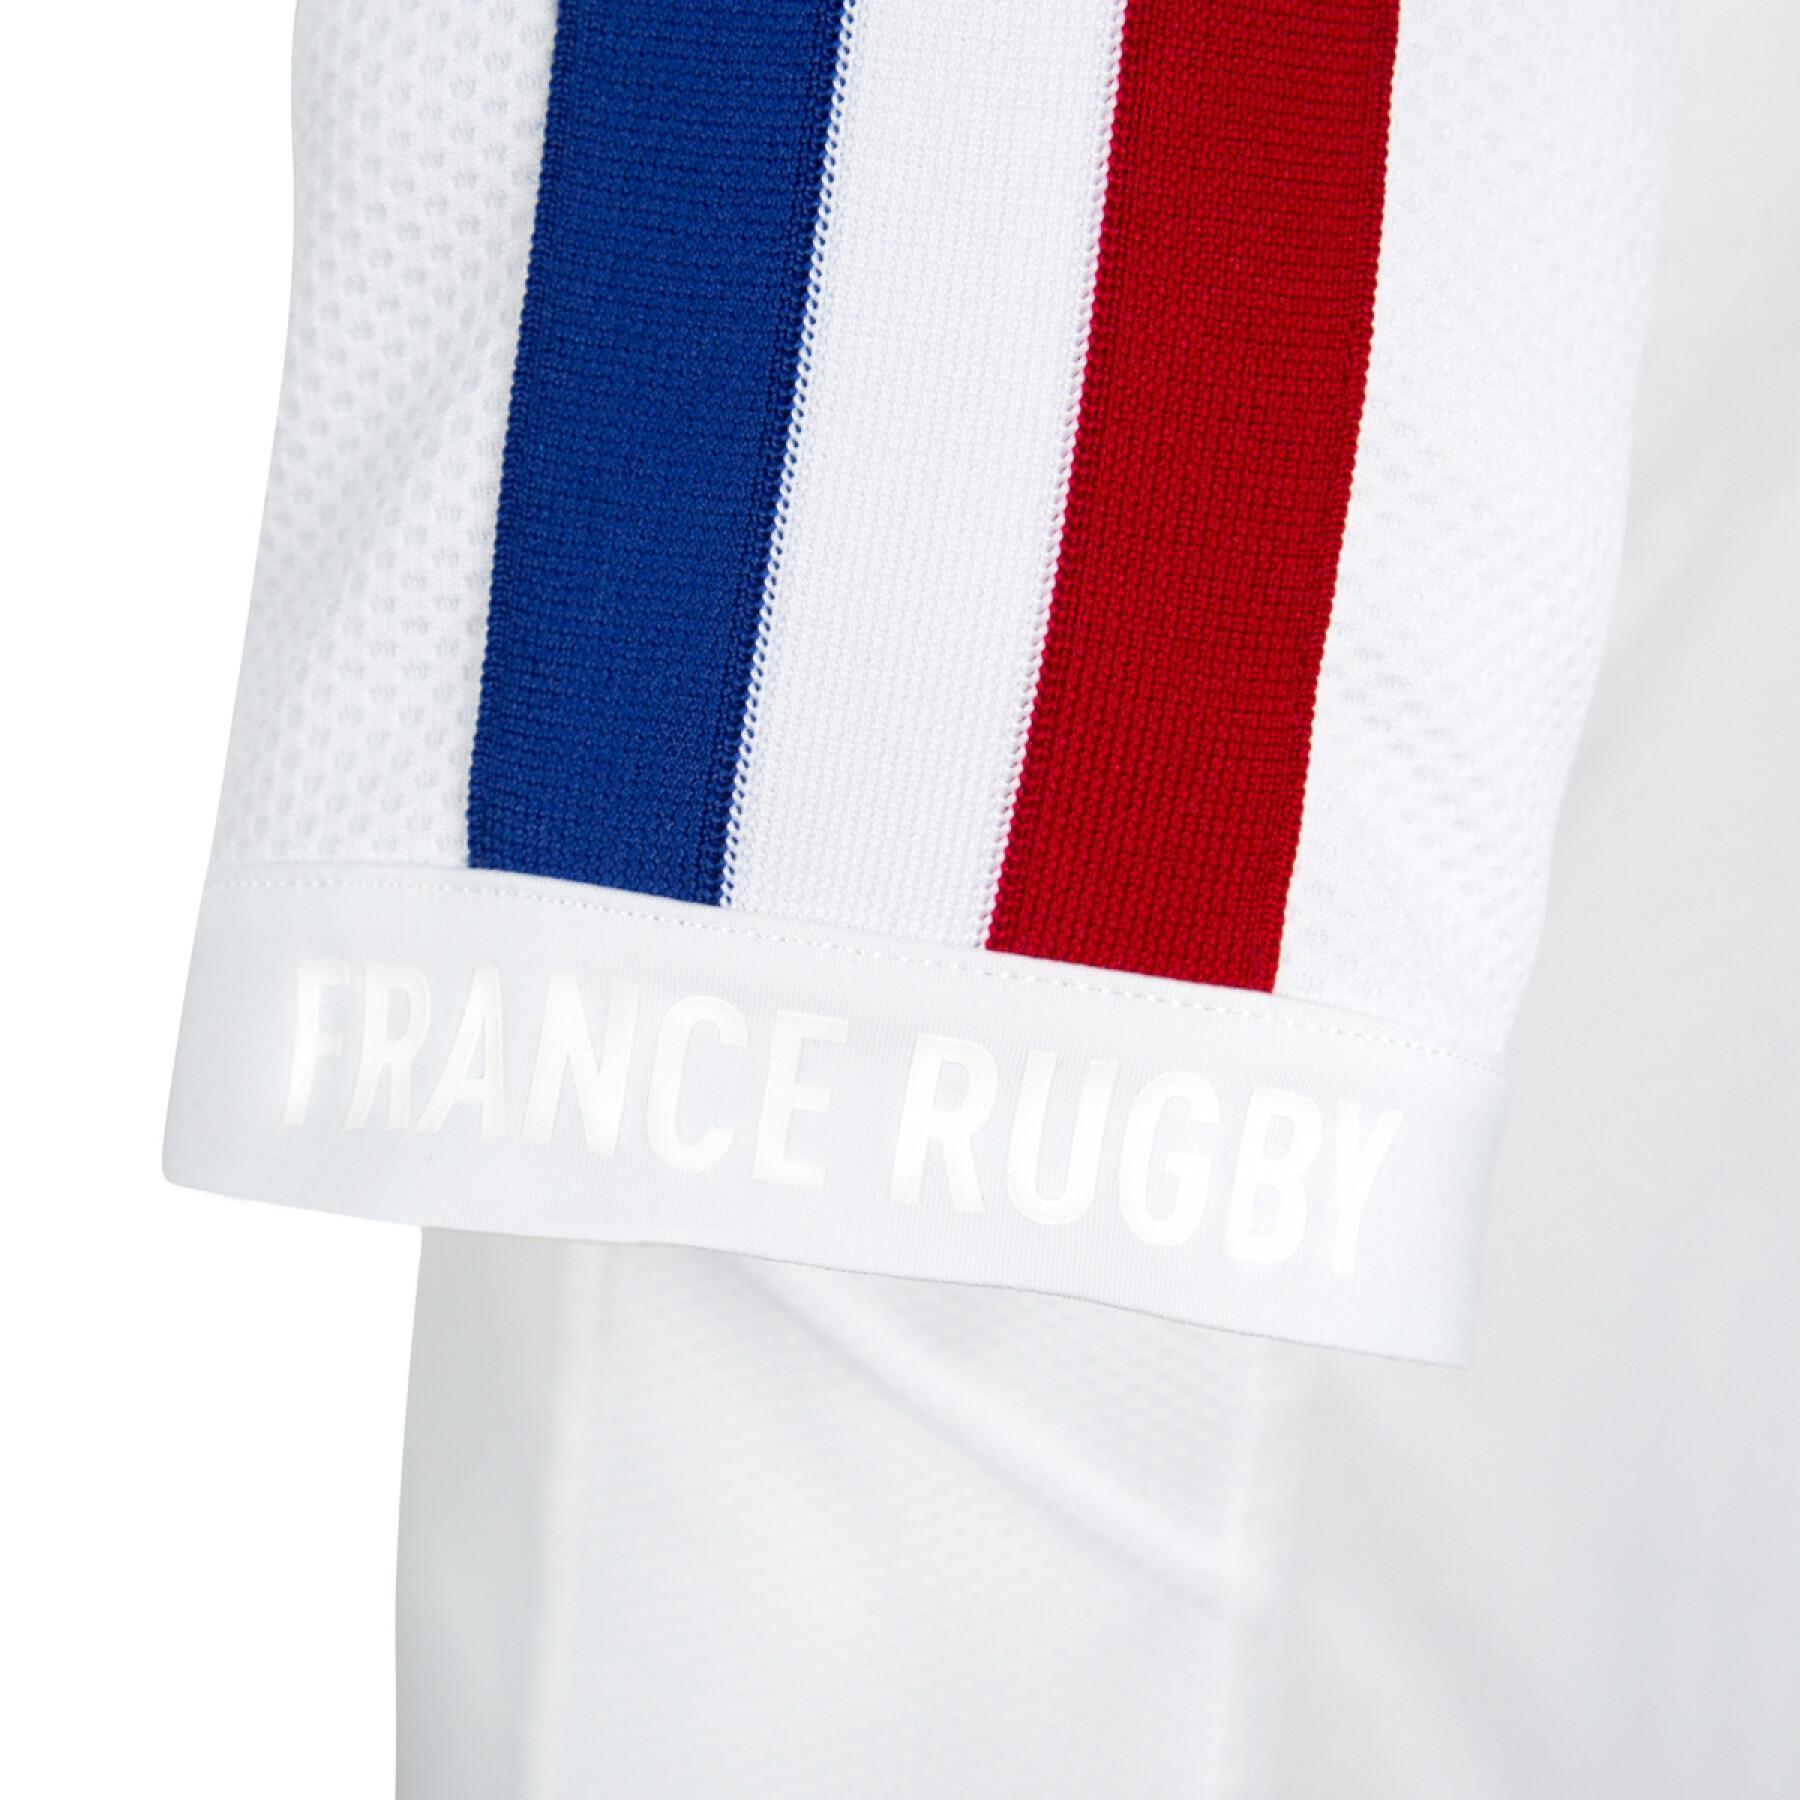 xv jersey from France